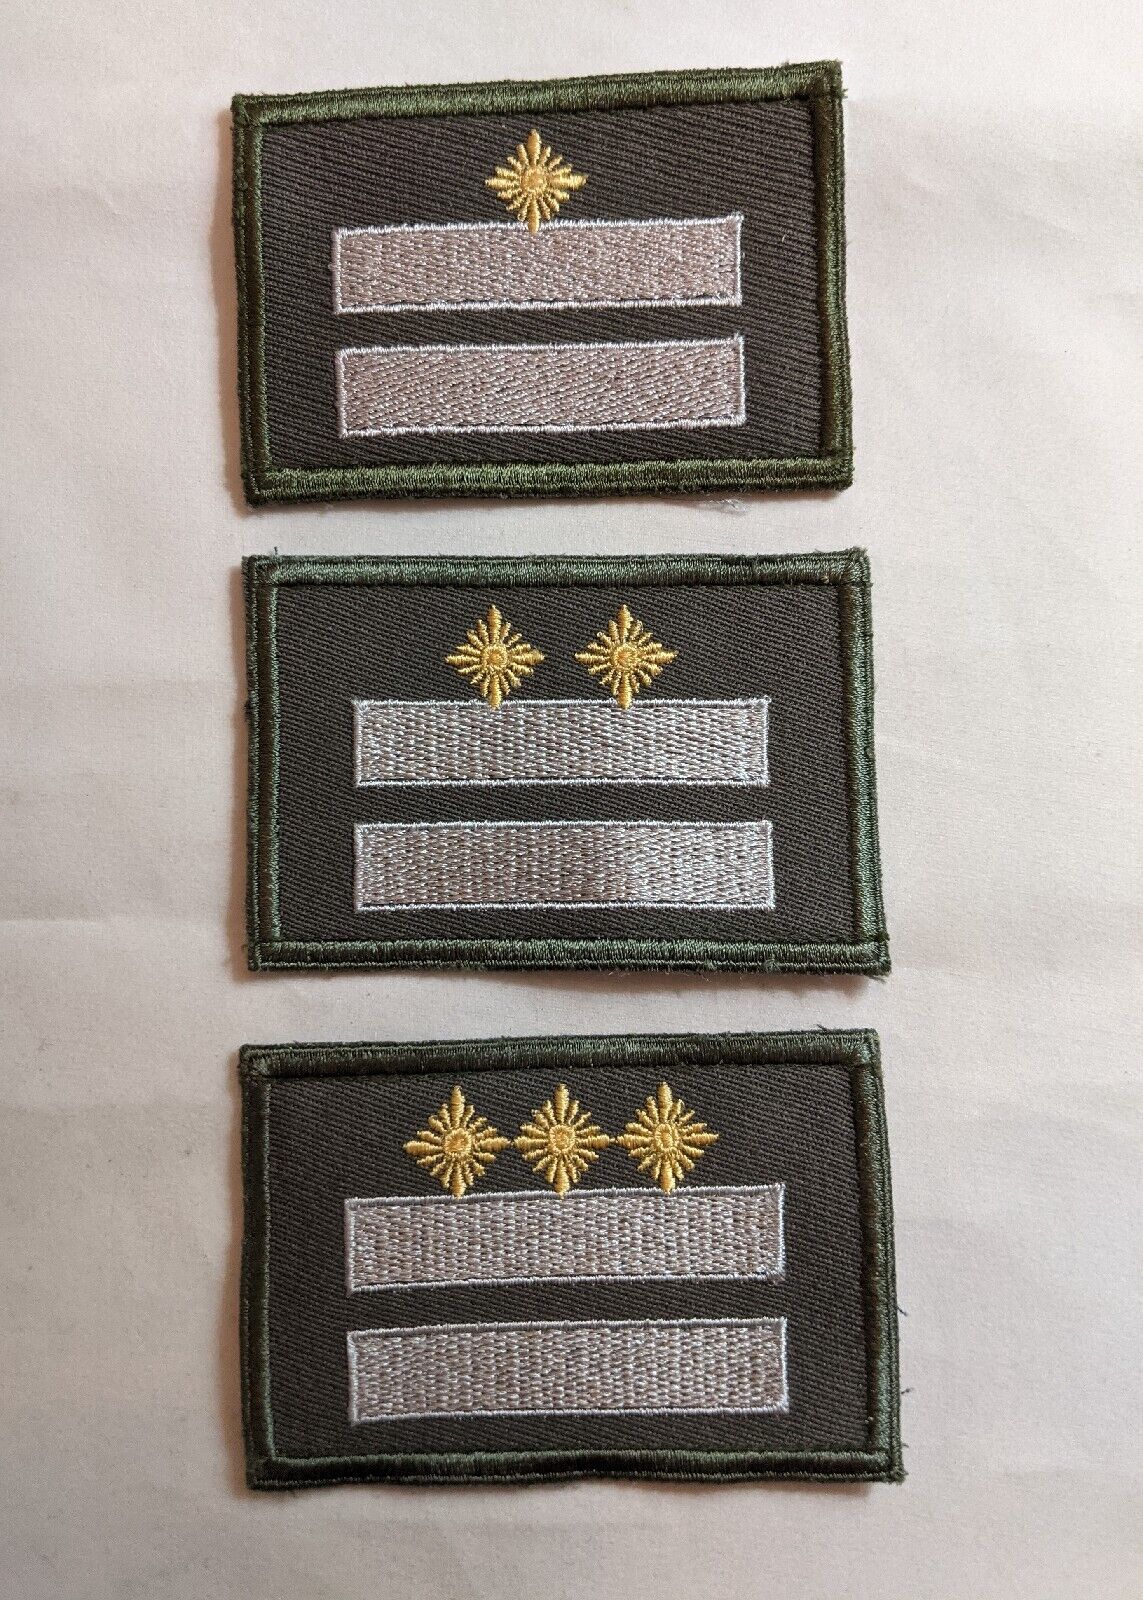 East Germany Patch DDR GDR Army Emblem Patches Military Rank Ranking Set Of 3 